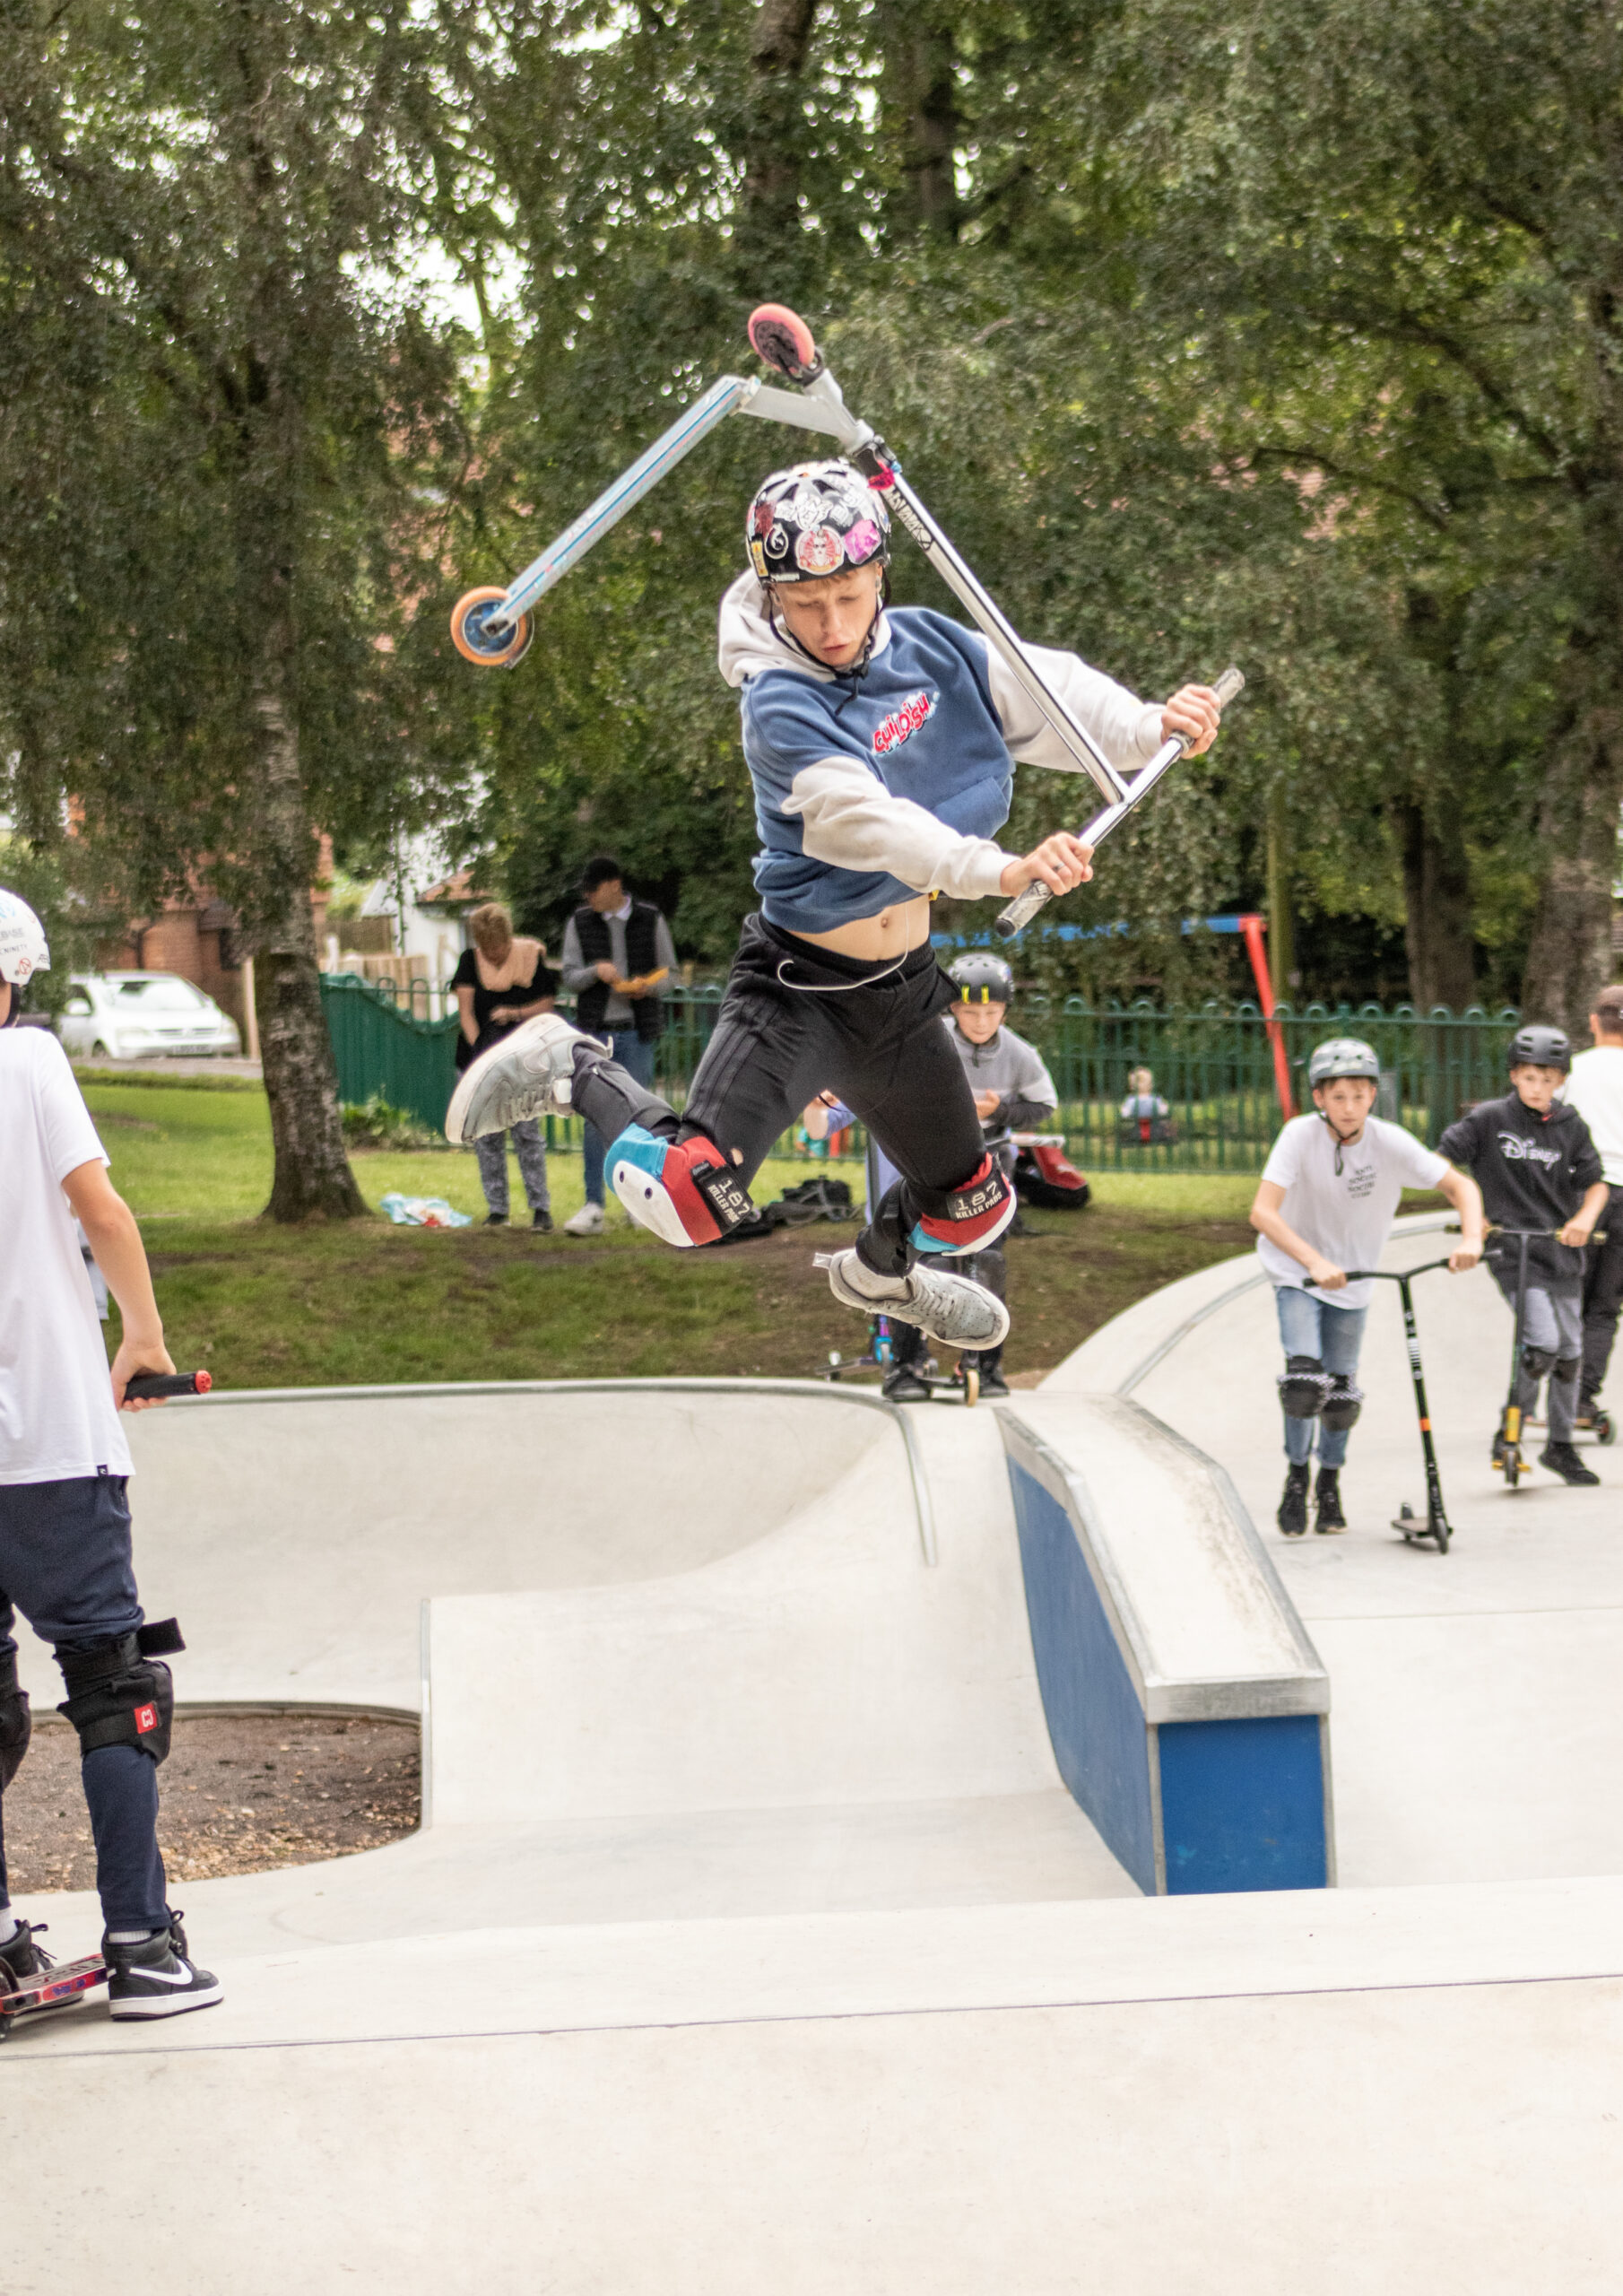 A successful Skate Jam!! Report and photographs